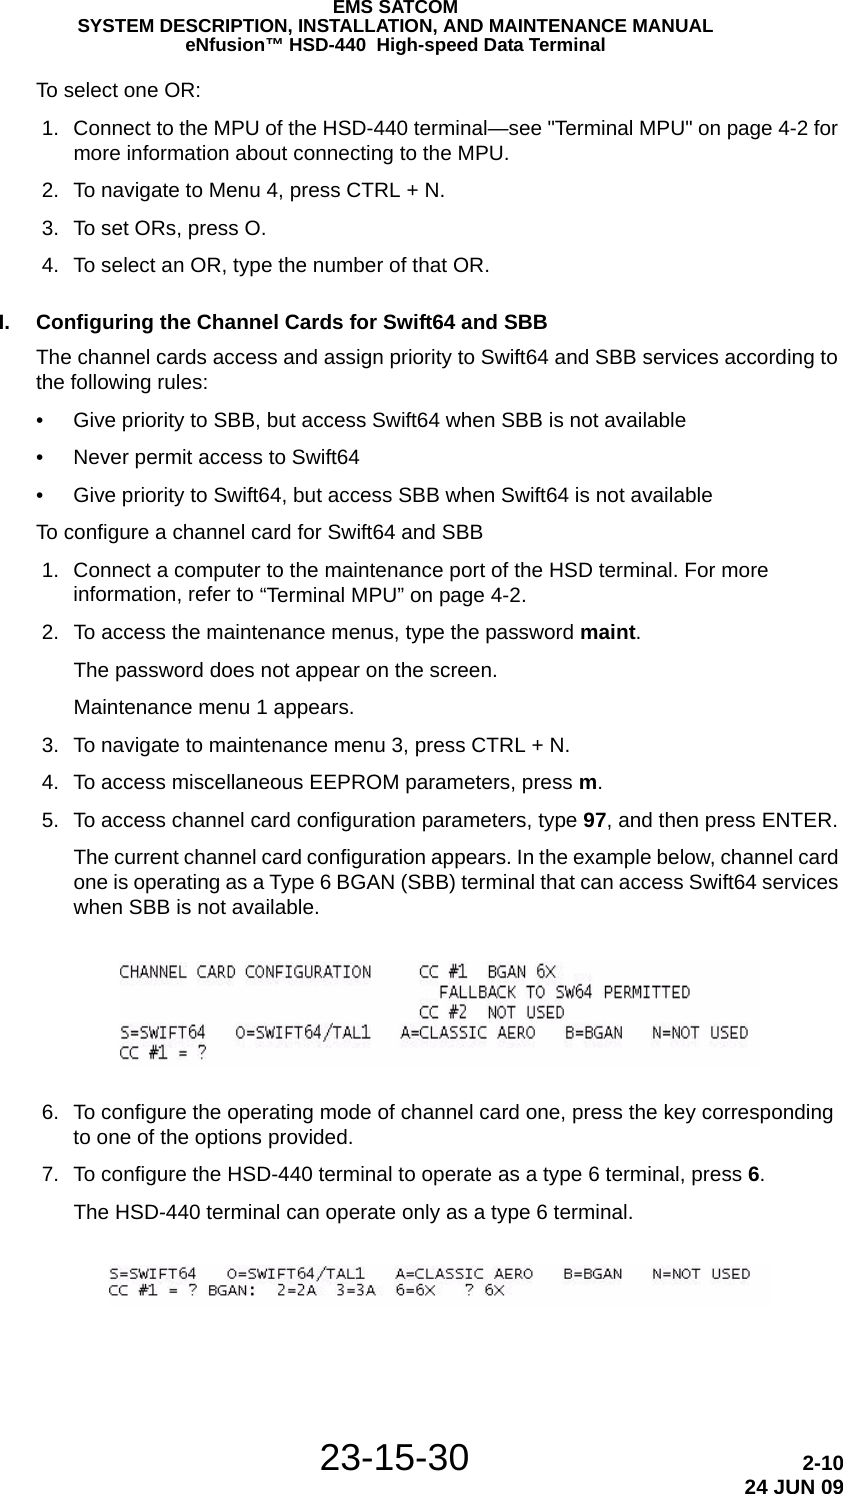 23-15-30 2-1024 JUN 09EMS SATCOMSYSTEM DESCRIPTION, INSTALLATION, AND MAINTENANCE MANUALeNfusion™ HSD-440  High-speed Data TerminalTo select one OR: 1. Connect to the MPU of the HSD-440 terminal—see &quot;Terminal MPU&quot; on page 4-2 for more information about connecting to the MPU. 2. To navigate to Menu 4, press CTRL + N. 3. To set ORs, press O. 4. To select an OR, type the number of that OR.I. Configuring the Channel Cards for Swift64 and SBBThe channel cards access and assign priority to Swift64 and SBB services according to the following rules:• Give priority to SBB, but access Swift64 when SBB is not available• Never permit access to Swift64• Give priority to Swift64, but access SBB when Swift64 is not availableTo configure a channel card for Swift64 and SBB 1. Connect a computer to the maintenance port of the HSD terminal. For more information, refer to “Terminal MPU” on page 4-2. 2. To access the maintenance menus, type the password maint.The password does not appear on the screen.Maintenance menu 1 appears. 3. To navigate to maintenance menu 3, press CTRL + N. 4. To access miscellaneous EEPROM parameters, press m. 5. To access channel card configuration parameters, type 97, and then press ENTER.The current channel card configuration appears. In the example below, channel card one is operating as a Type 6 BGAN (SBB) terminal that can access Swift64 services when SBB is not available. 6. To configure the operating mode of channel card one, press the key corresponding to one of the options provided. 7. To configure the HSD-440 terminal to operate as a type 6 terminal, press 6.The HSD-440 terminal can operate only as a type 6 terminal.